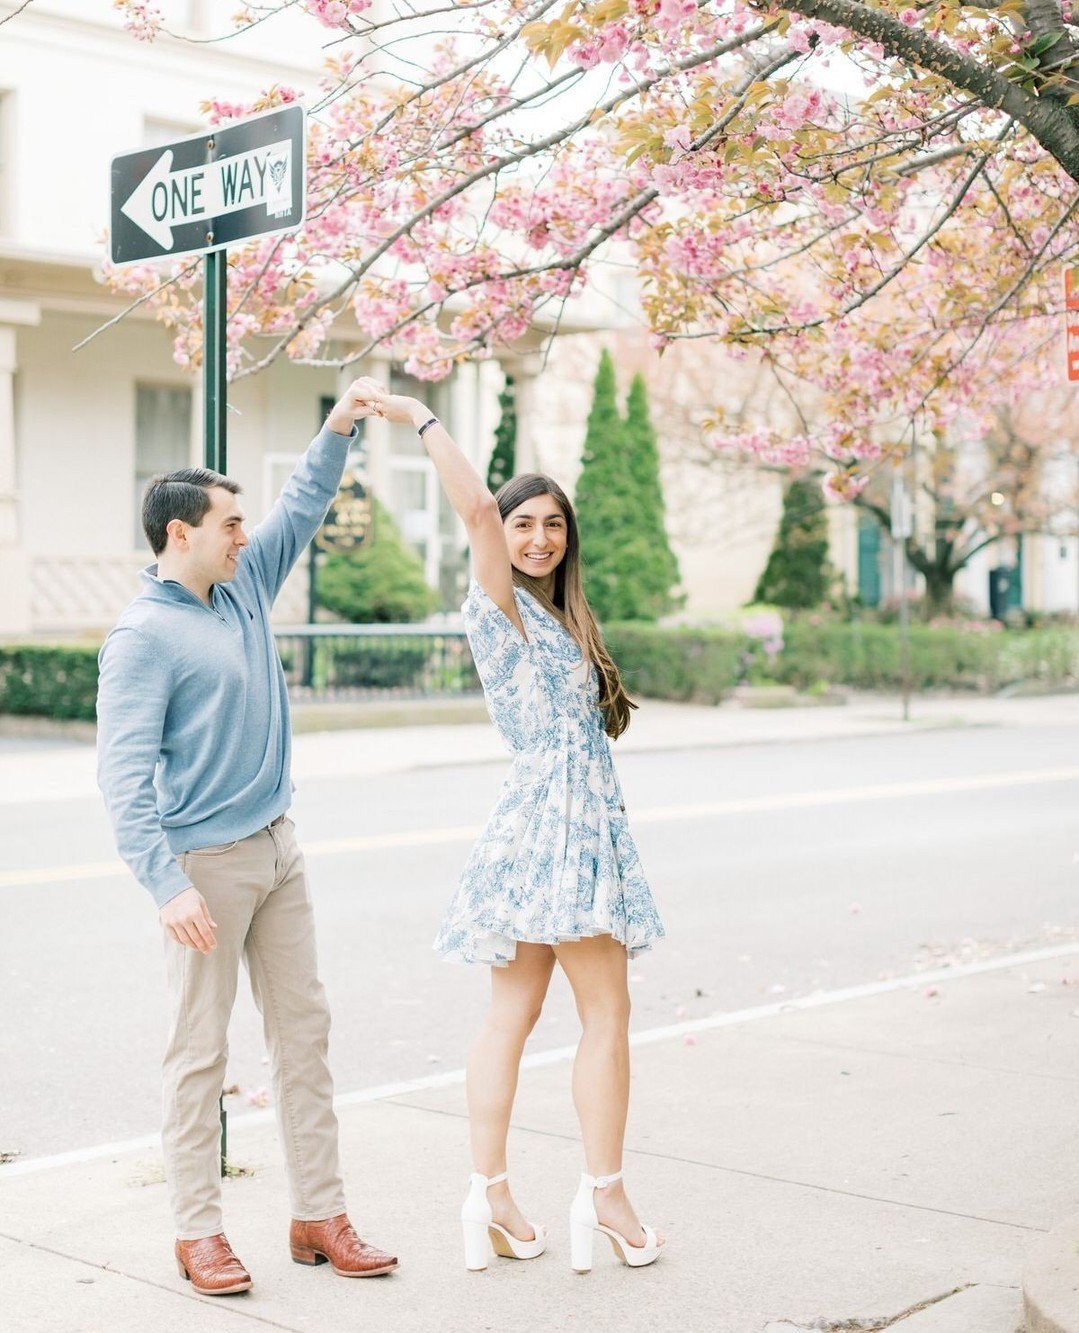 it's wedding day for these two 🍕 we had the MOST fun traipsing around New Haven, grabbing a slice at their favorite pizza place, having a picnic in the park and a walk under the cherry blossoms 🌸